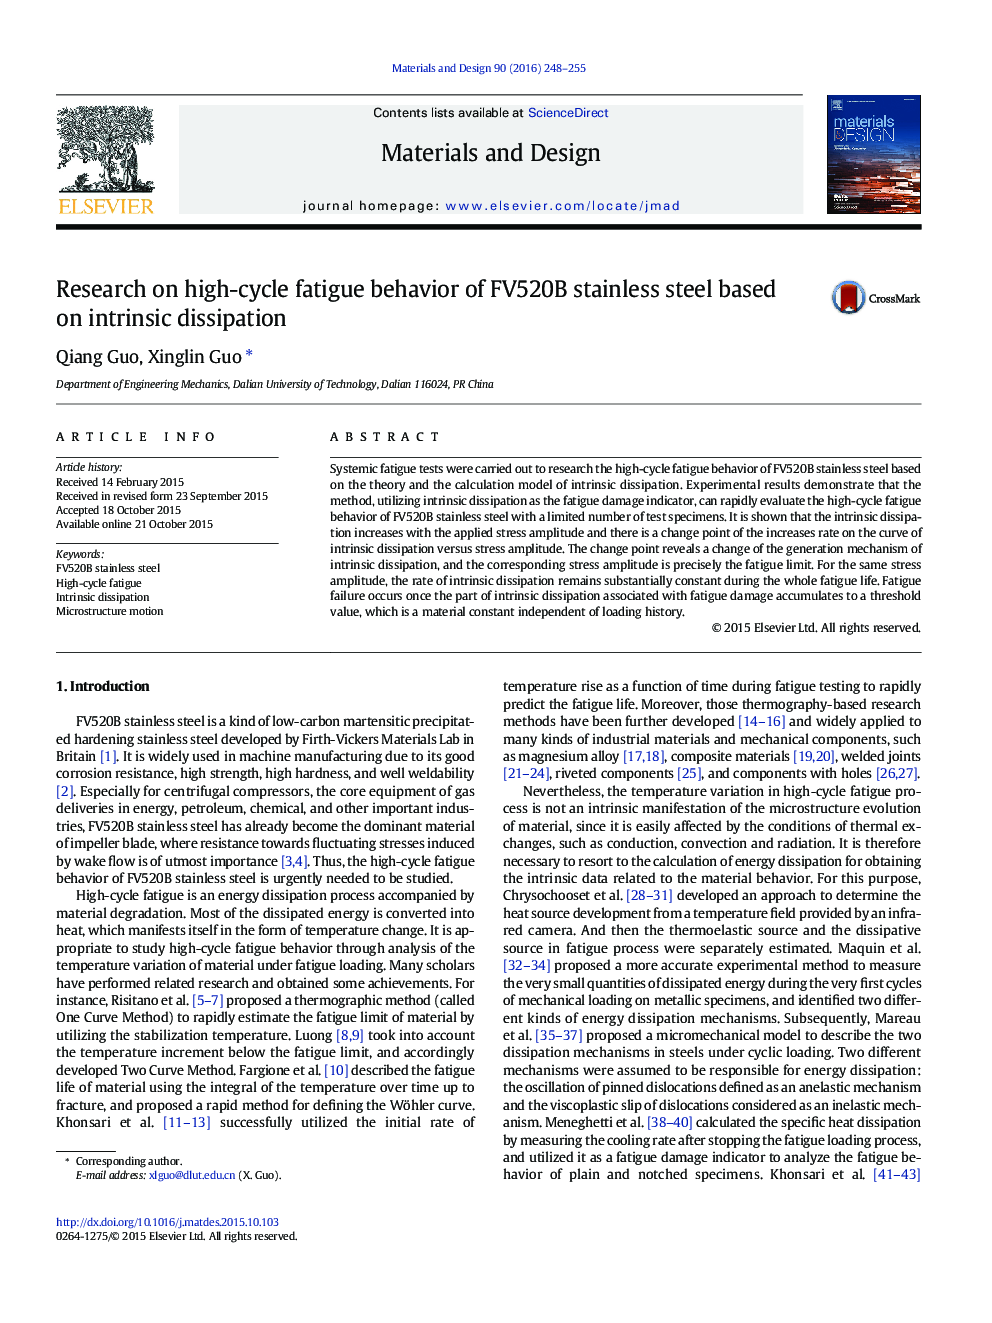 Research on high-cycle fatigue behavior of FV520B stainless steel based on intrinsic dissipation